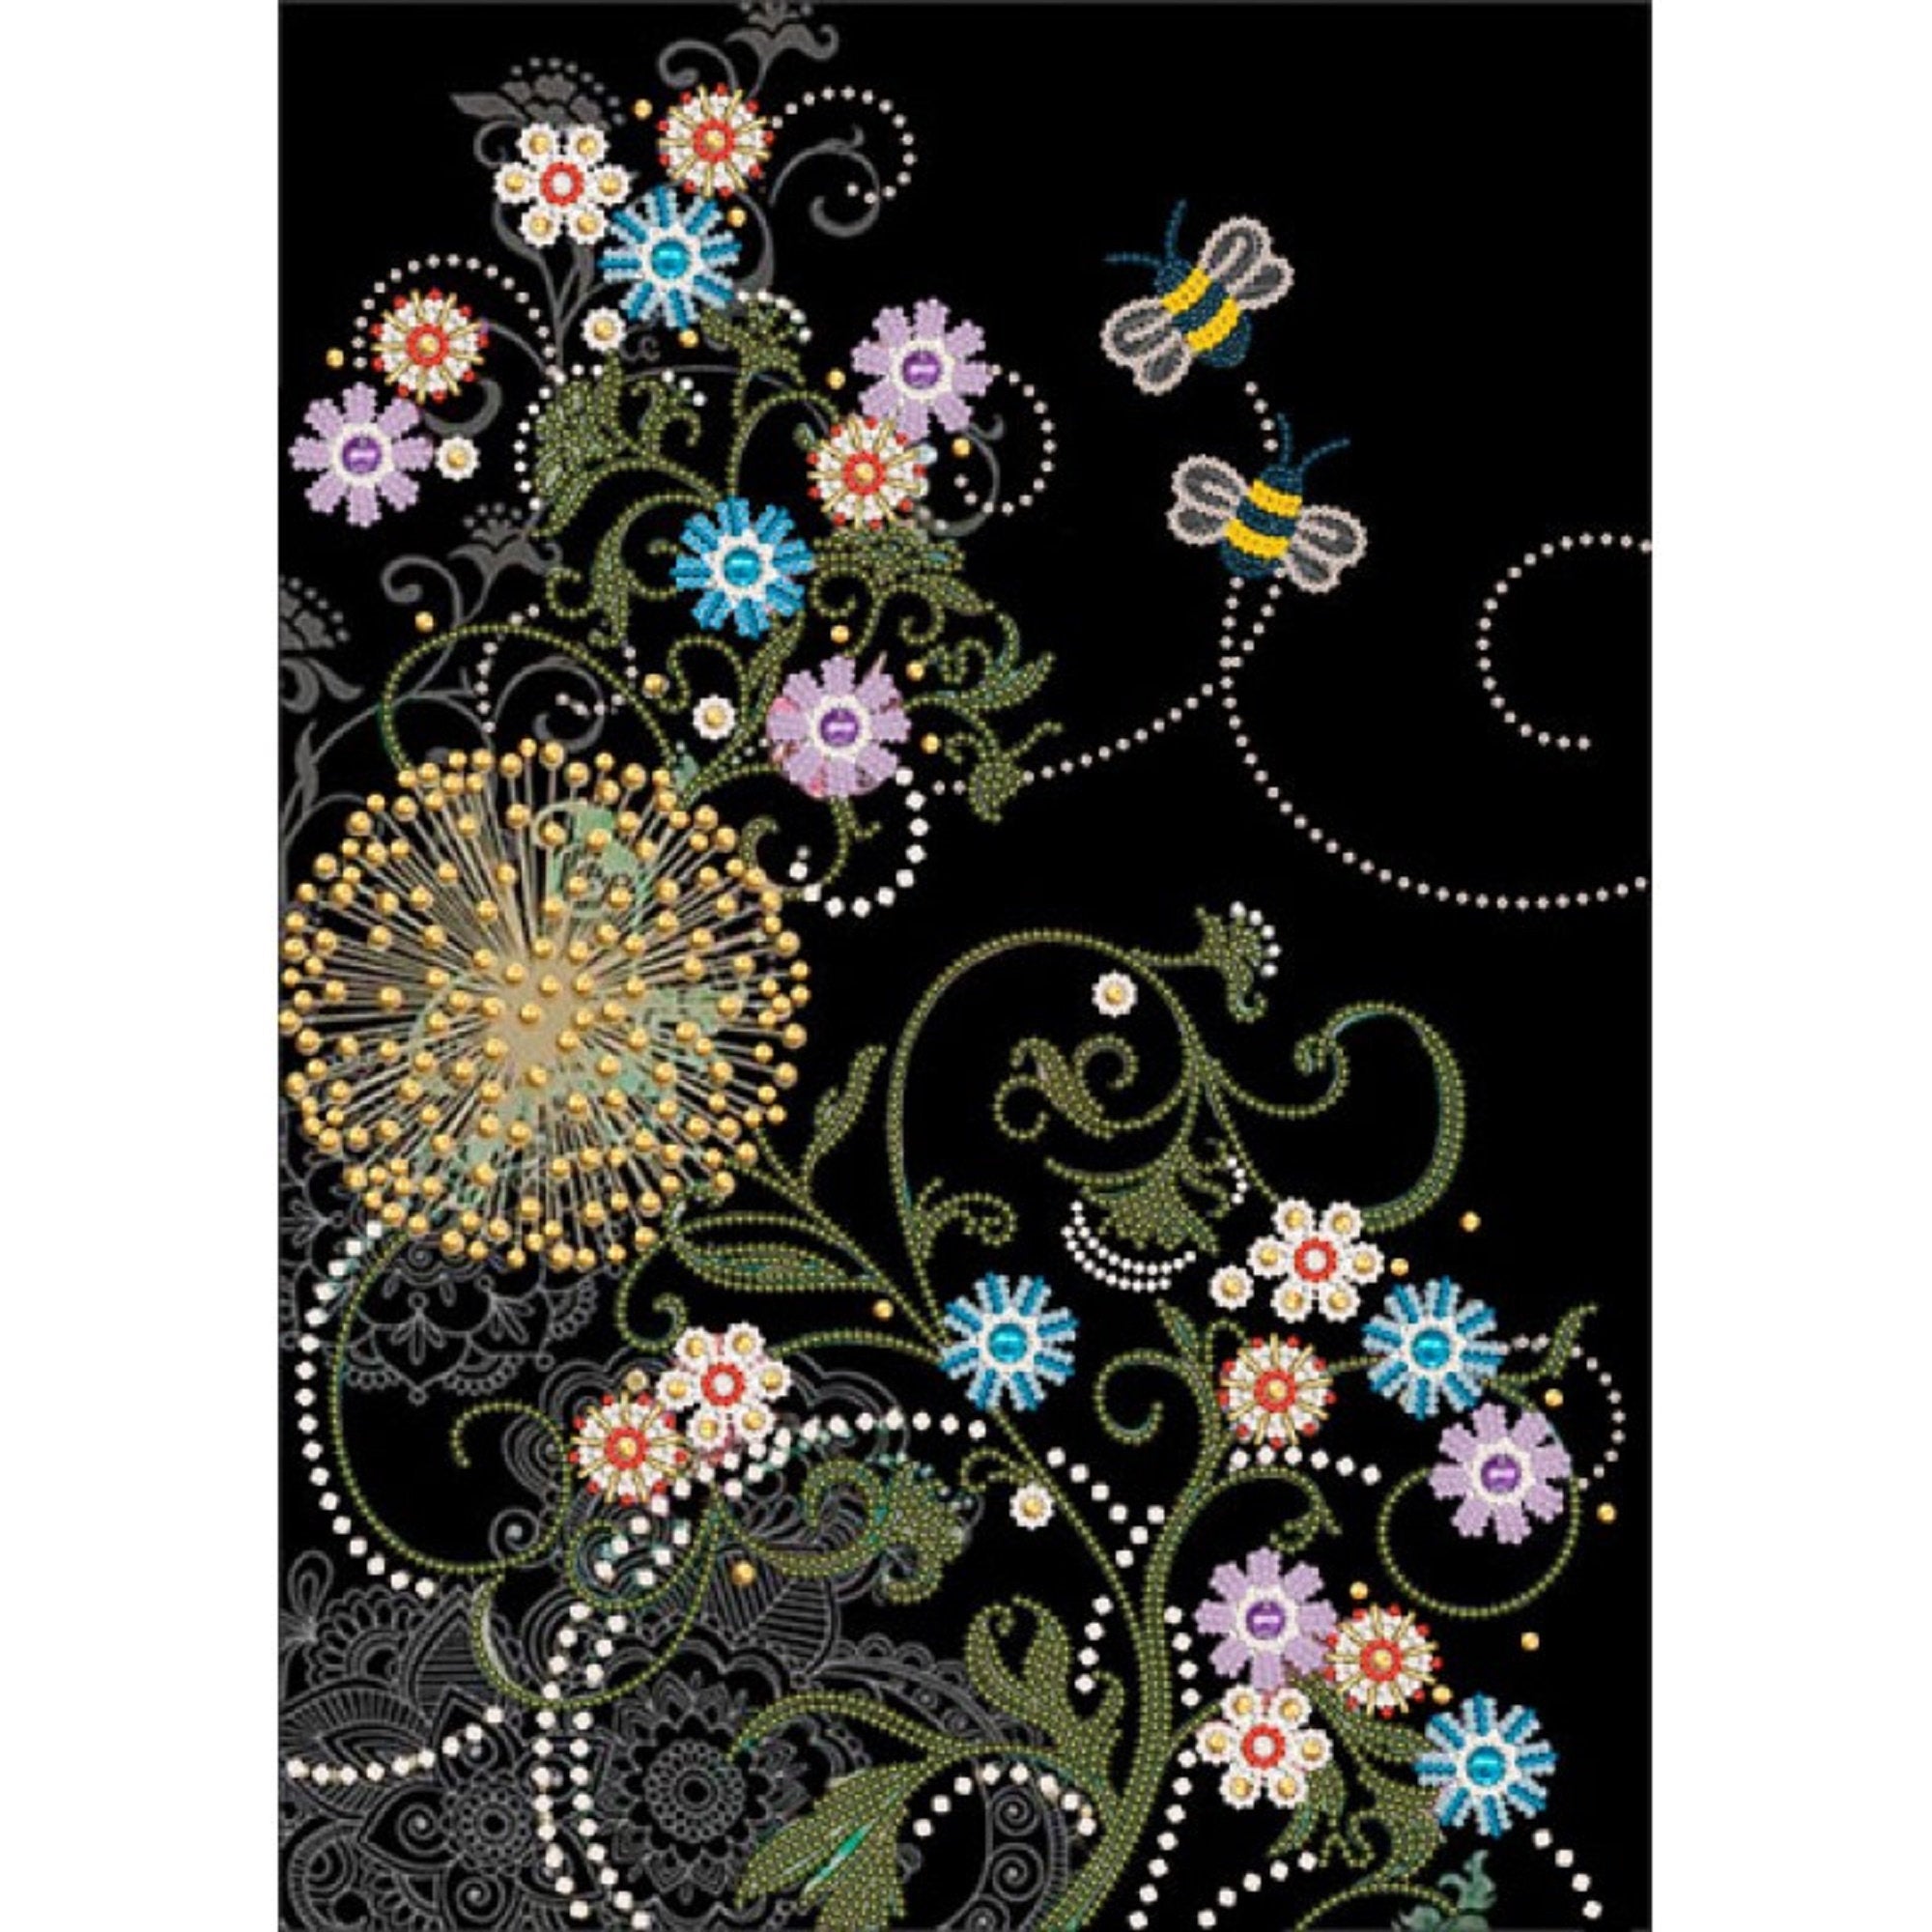 Bead Embroidery Kit DIY Craft Kit Stamped Bead Needlepoint Flowers d3142